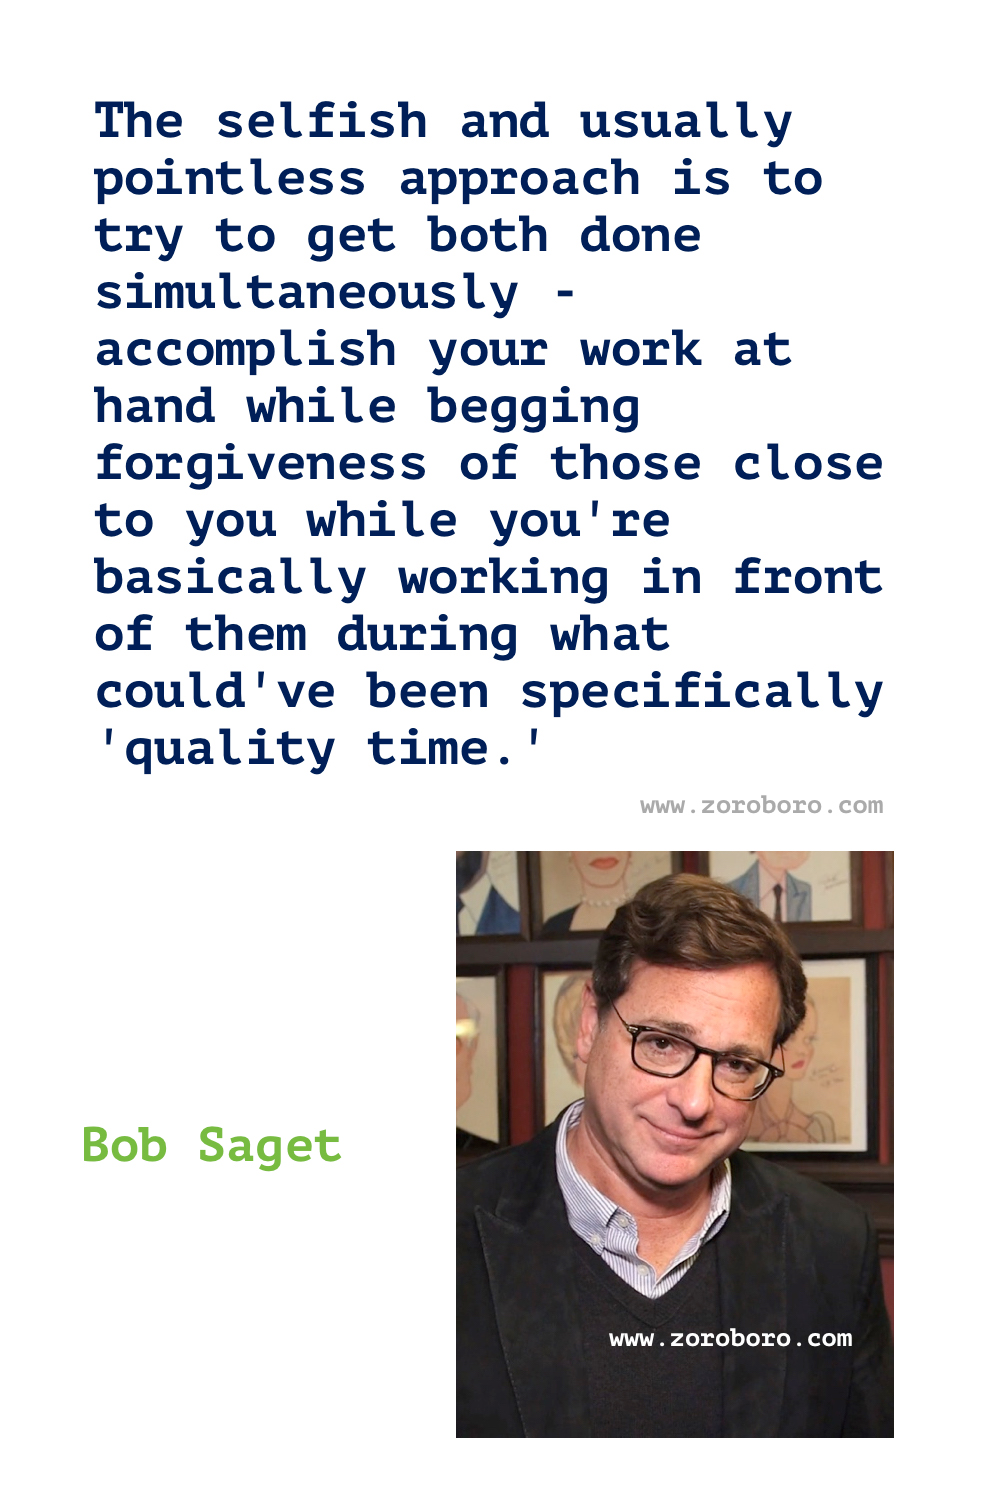 Bob Saget Quotes. Bob Saget Comedy Quotes, Dad Quotes, House Quotes, & Mom Quotes. Bob Saget Funny Quotes. Bob Saget Stand-up Comedian. Bob Saget Quotes, Comedian and 'Full House' star.